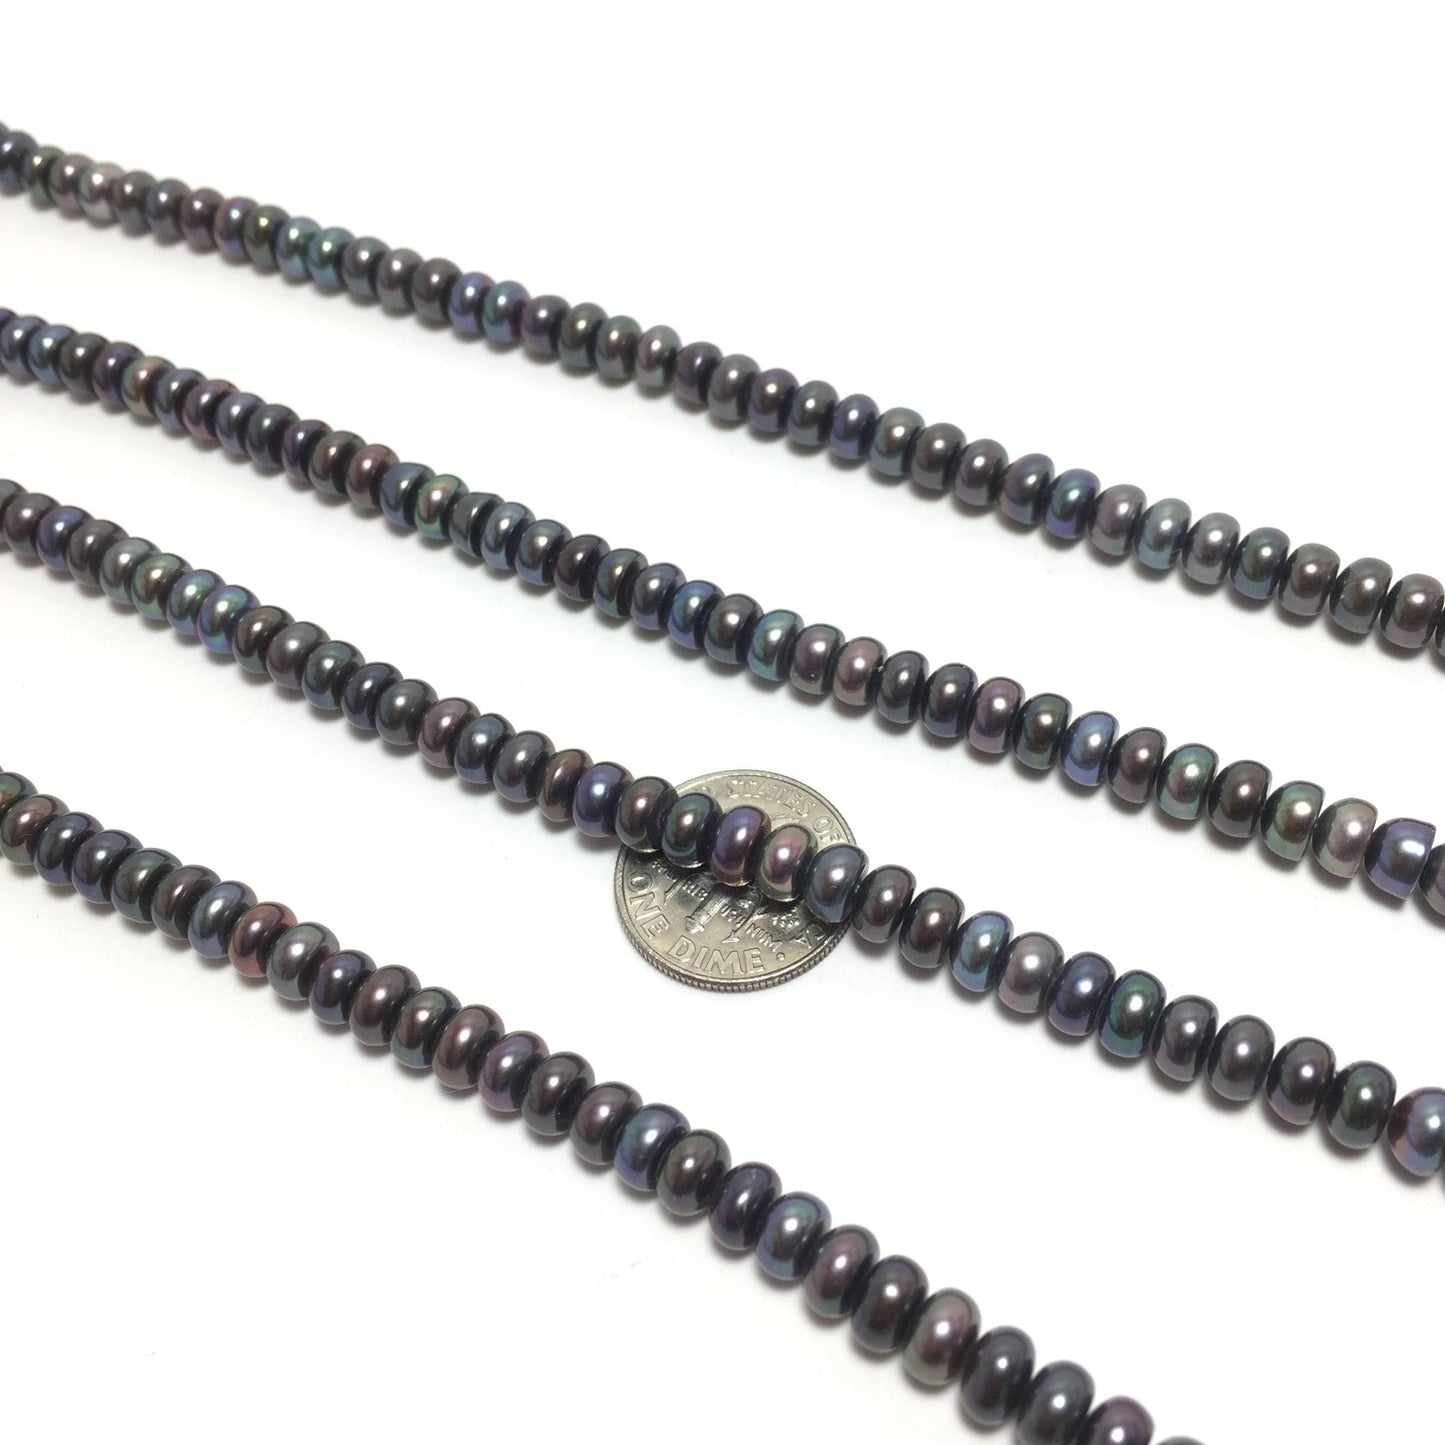 Button or Roundel Pearls, 5-5.5mm Peacock Color Freshwater Pearls in 16 inches, BUT003